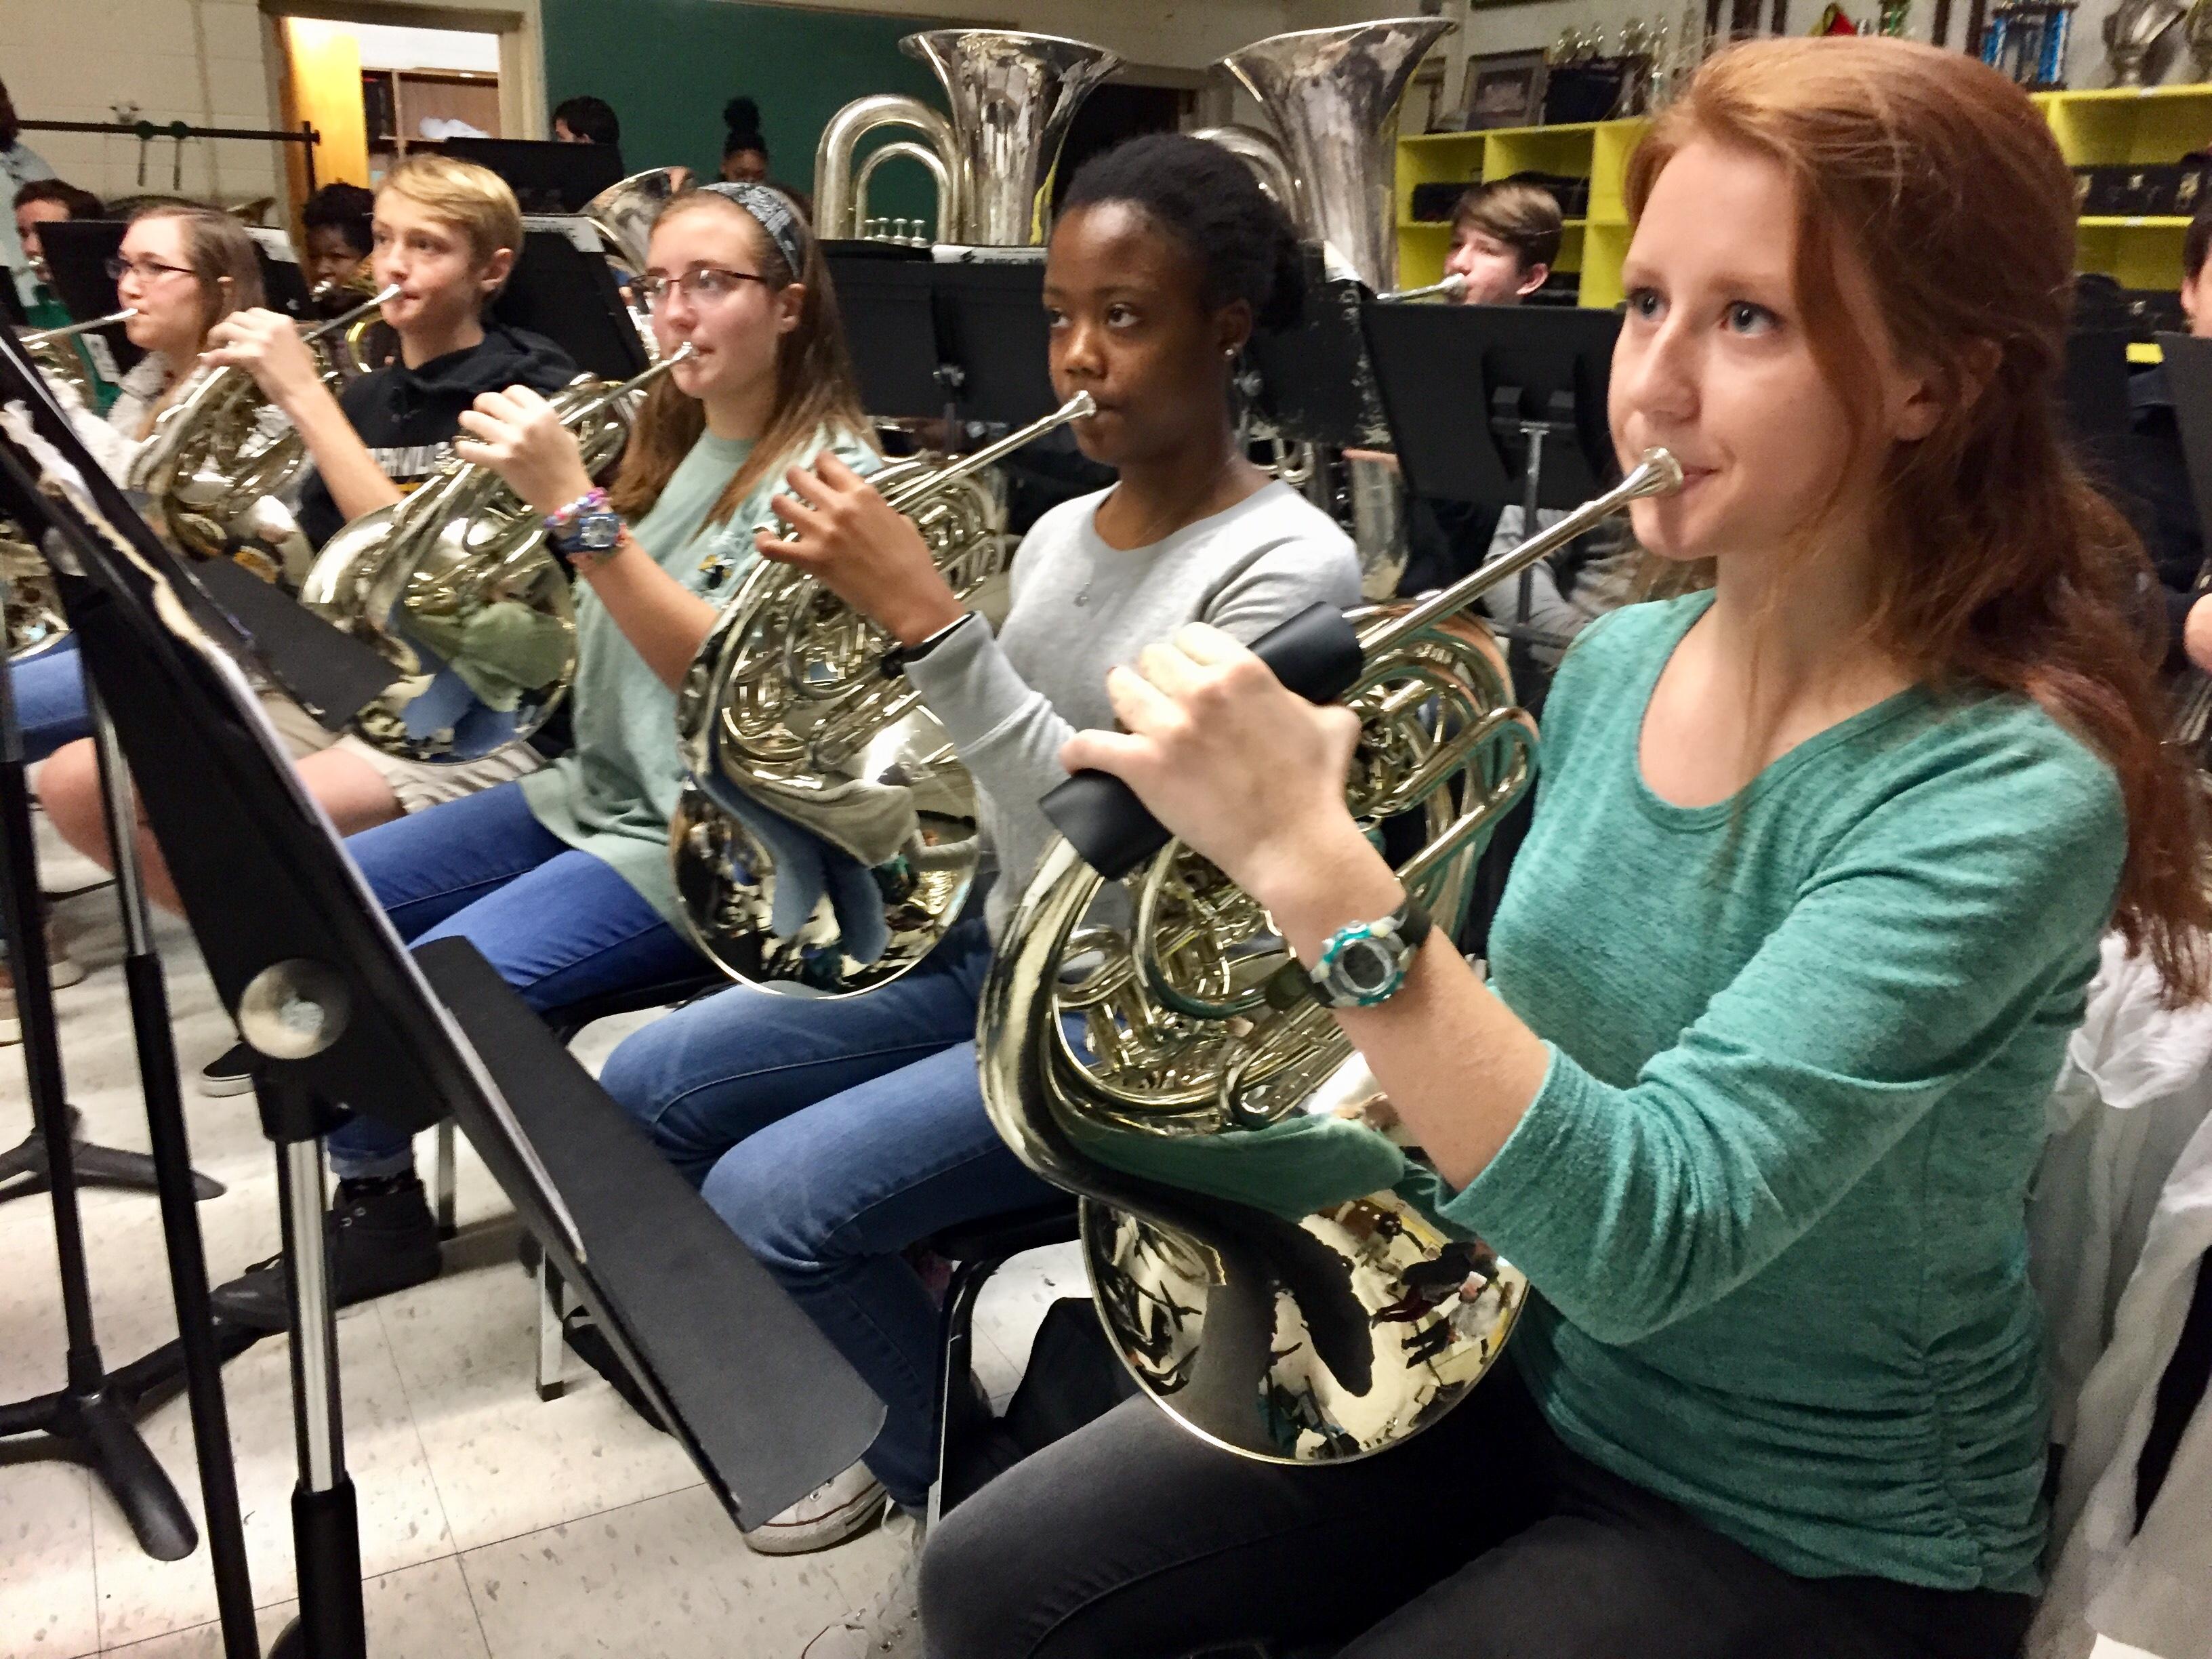 Students in SHS Band practice